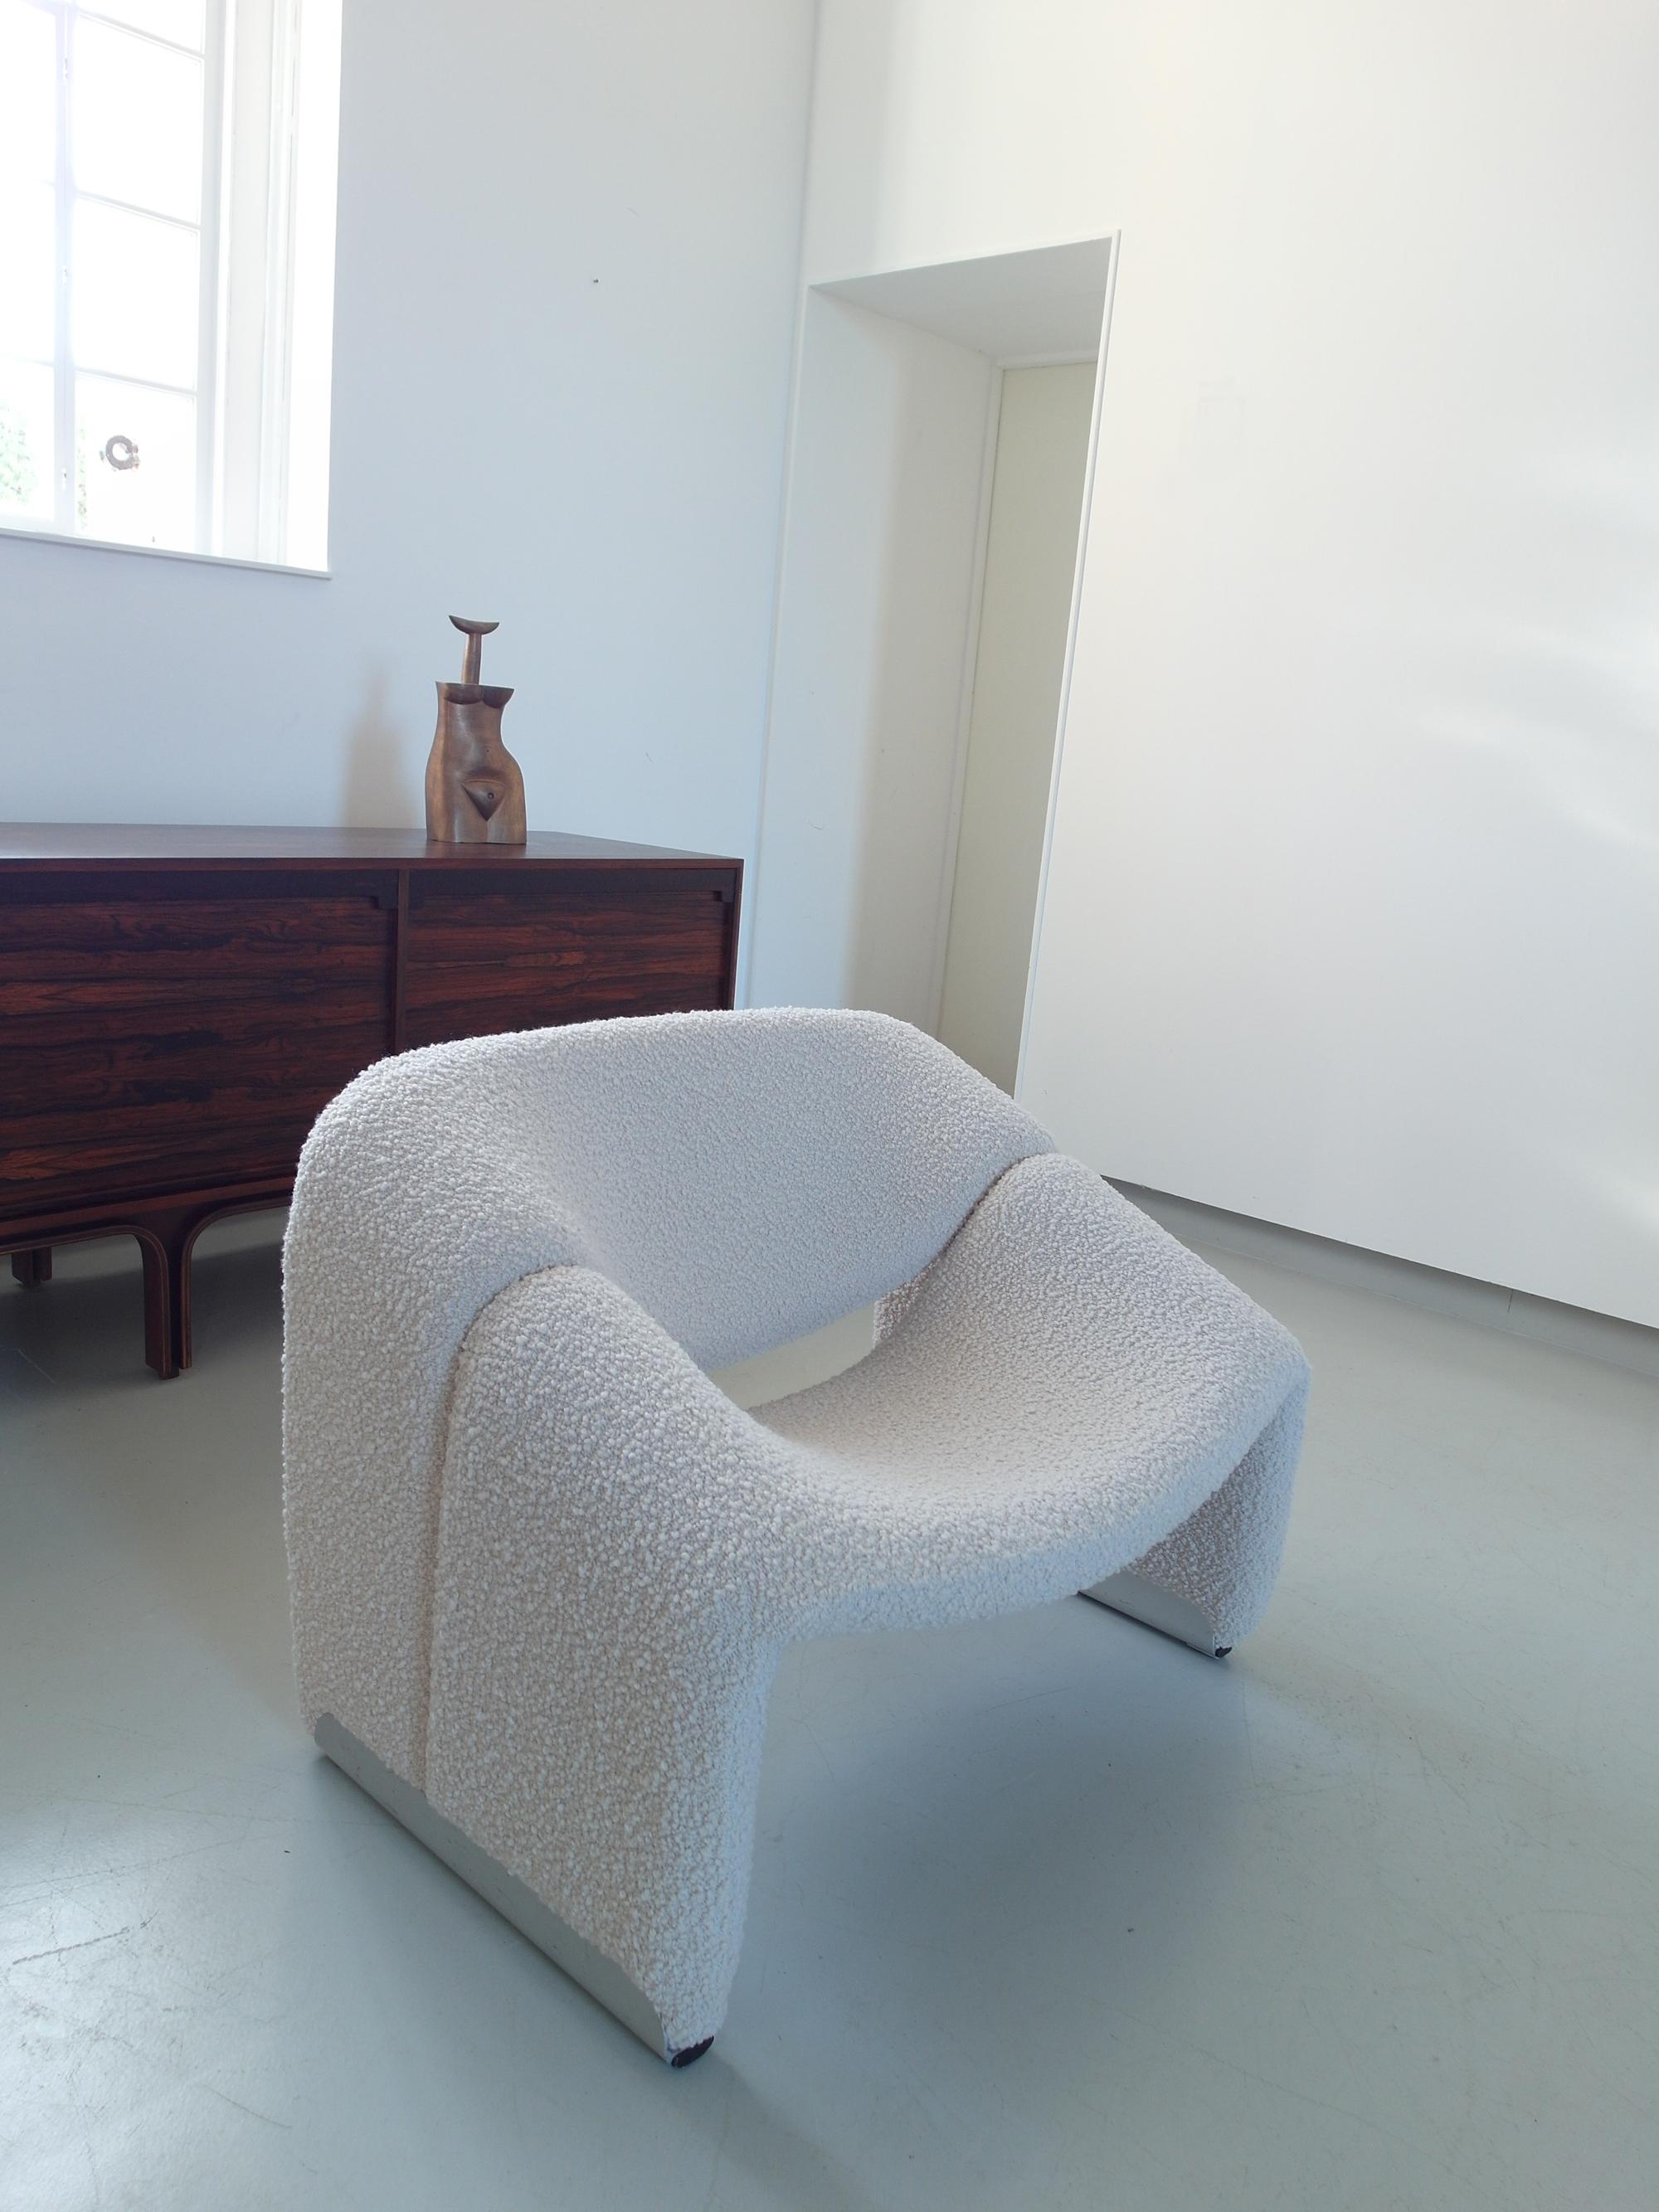 A perfect ivory wool upholstered Groovy chair, or model F598 chair, designed by Pierre Paulin for Artifort, The Netherlands, 1973.
This sculptural lounge chair has been delicately upholstered in a crème white wool which feels really soft and looks